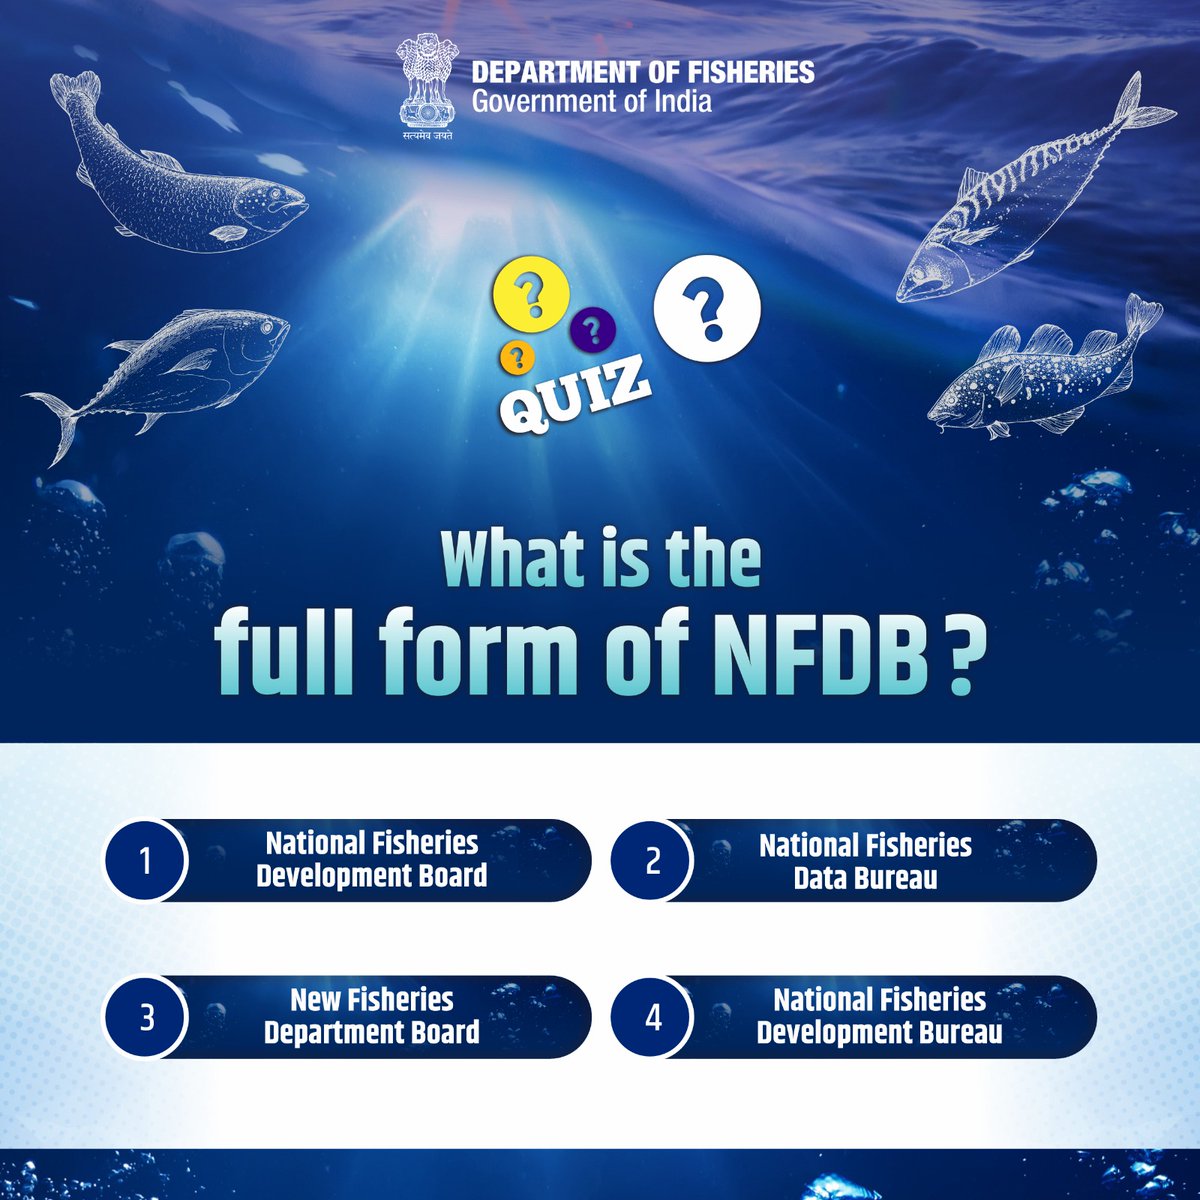 #DoYouKnow? What is the full form of NFDB? To Participate: ✅ Comment your answer below ✅ Follow us on Facebook, Instagram, Twitter, LinkedIn, Koo, and YouTube ✅ Like and share this post ✅ Tag your friends and colleagues